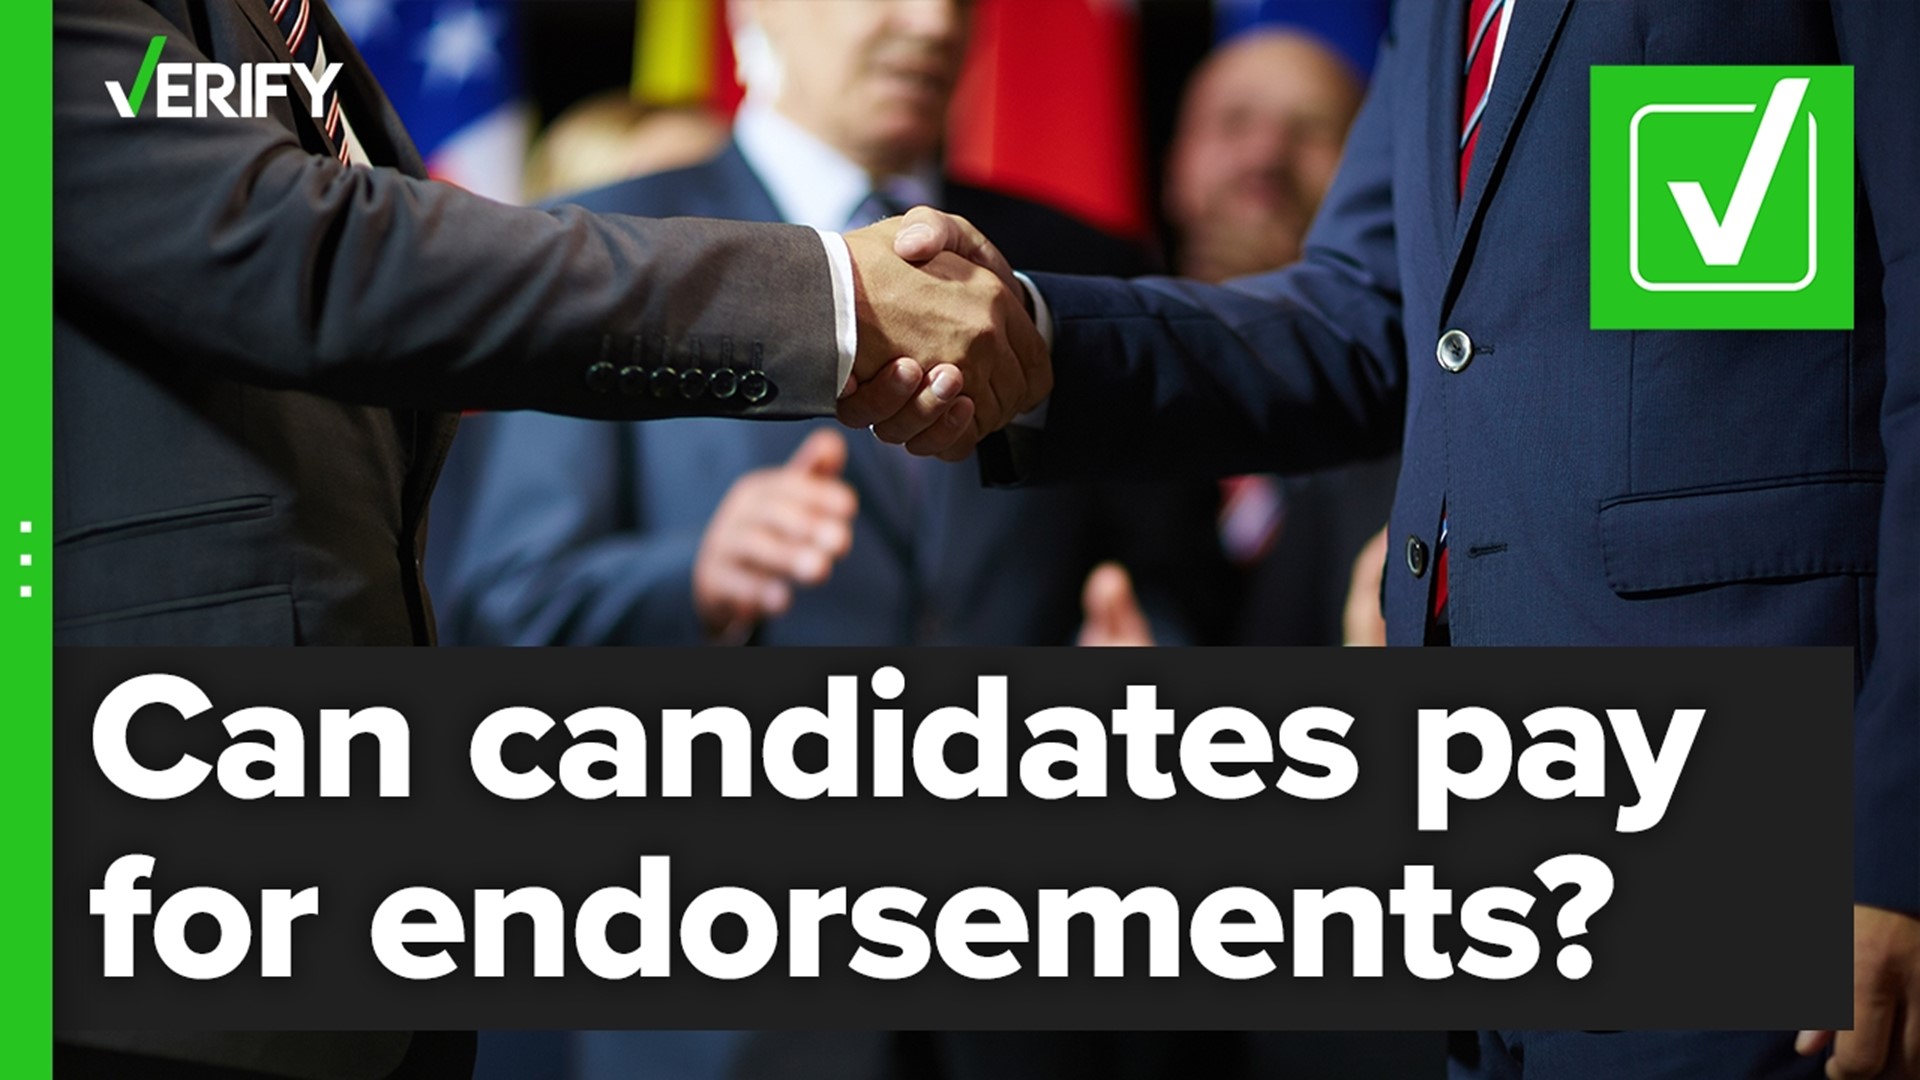 There’s no law against paying people to endorse a political campaign, but candidates have to publicly disclose the payment.